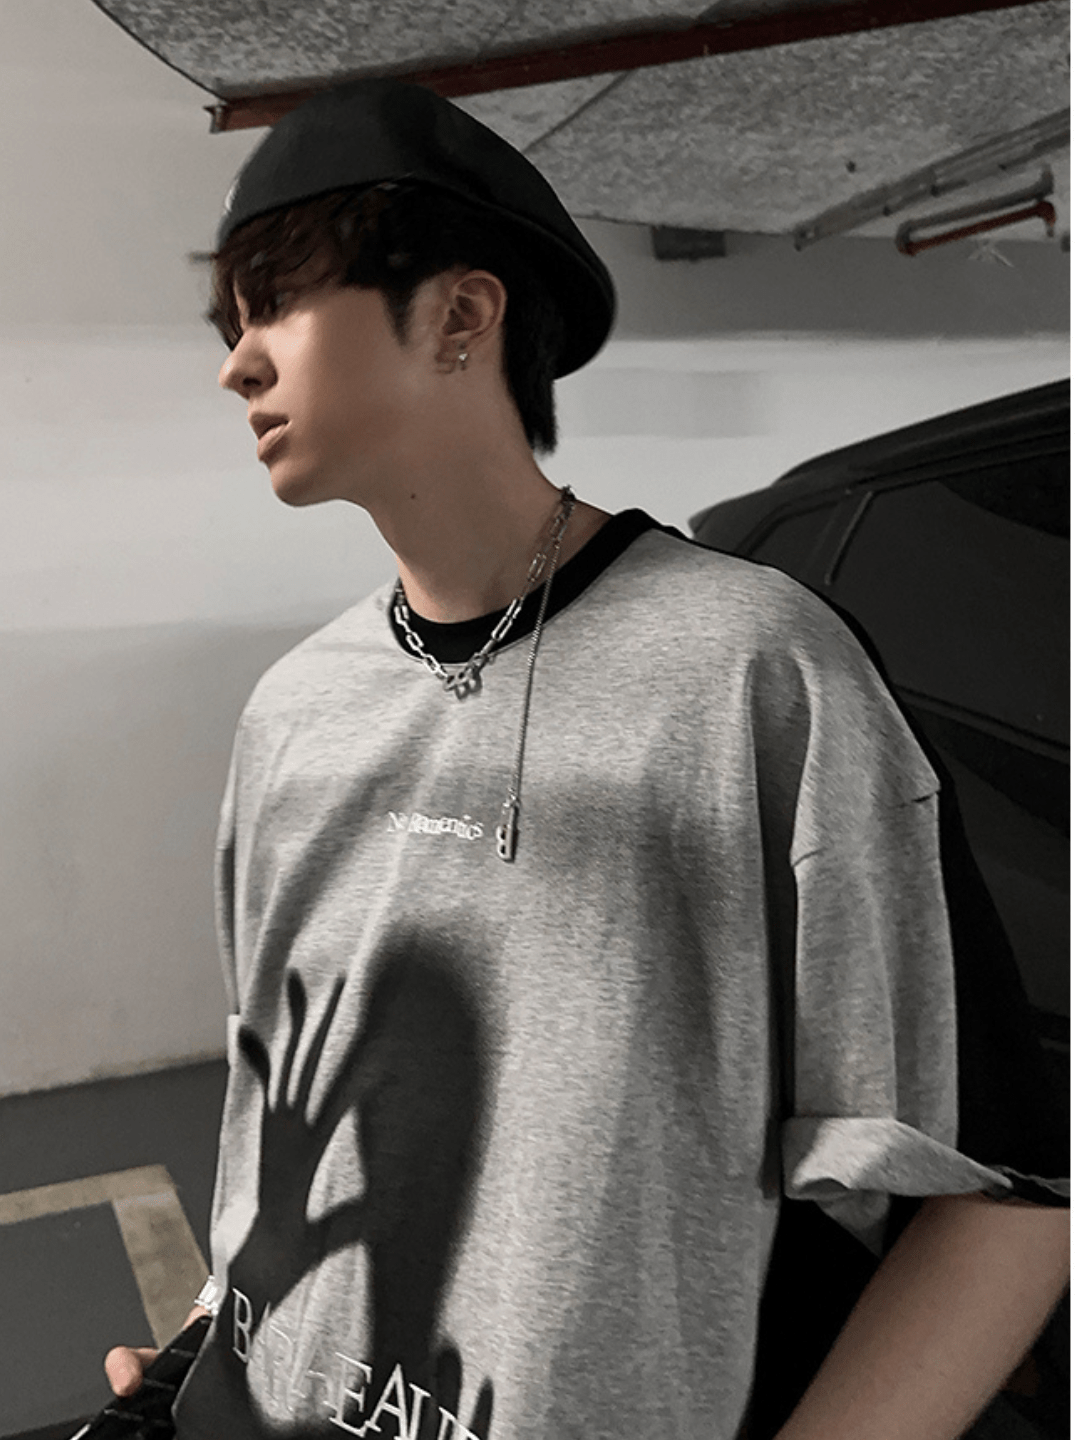 [JH HOMME] Letter Printed Sleeve T-shirt na1249